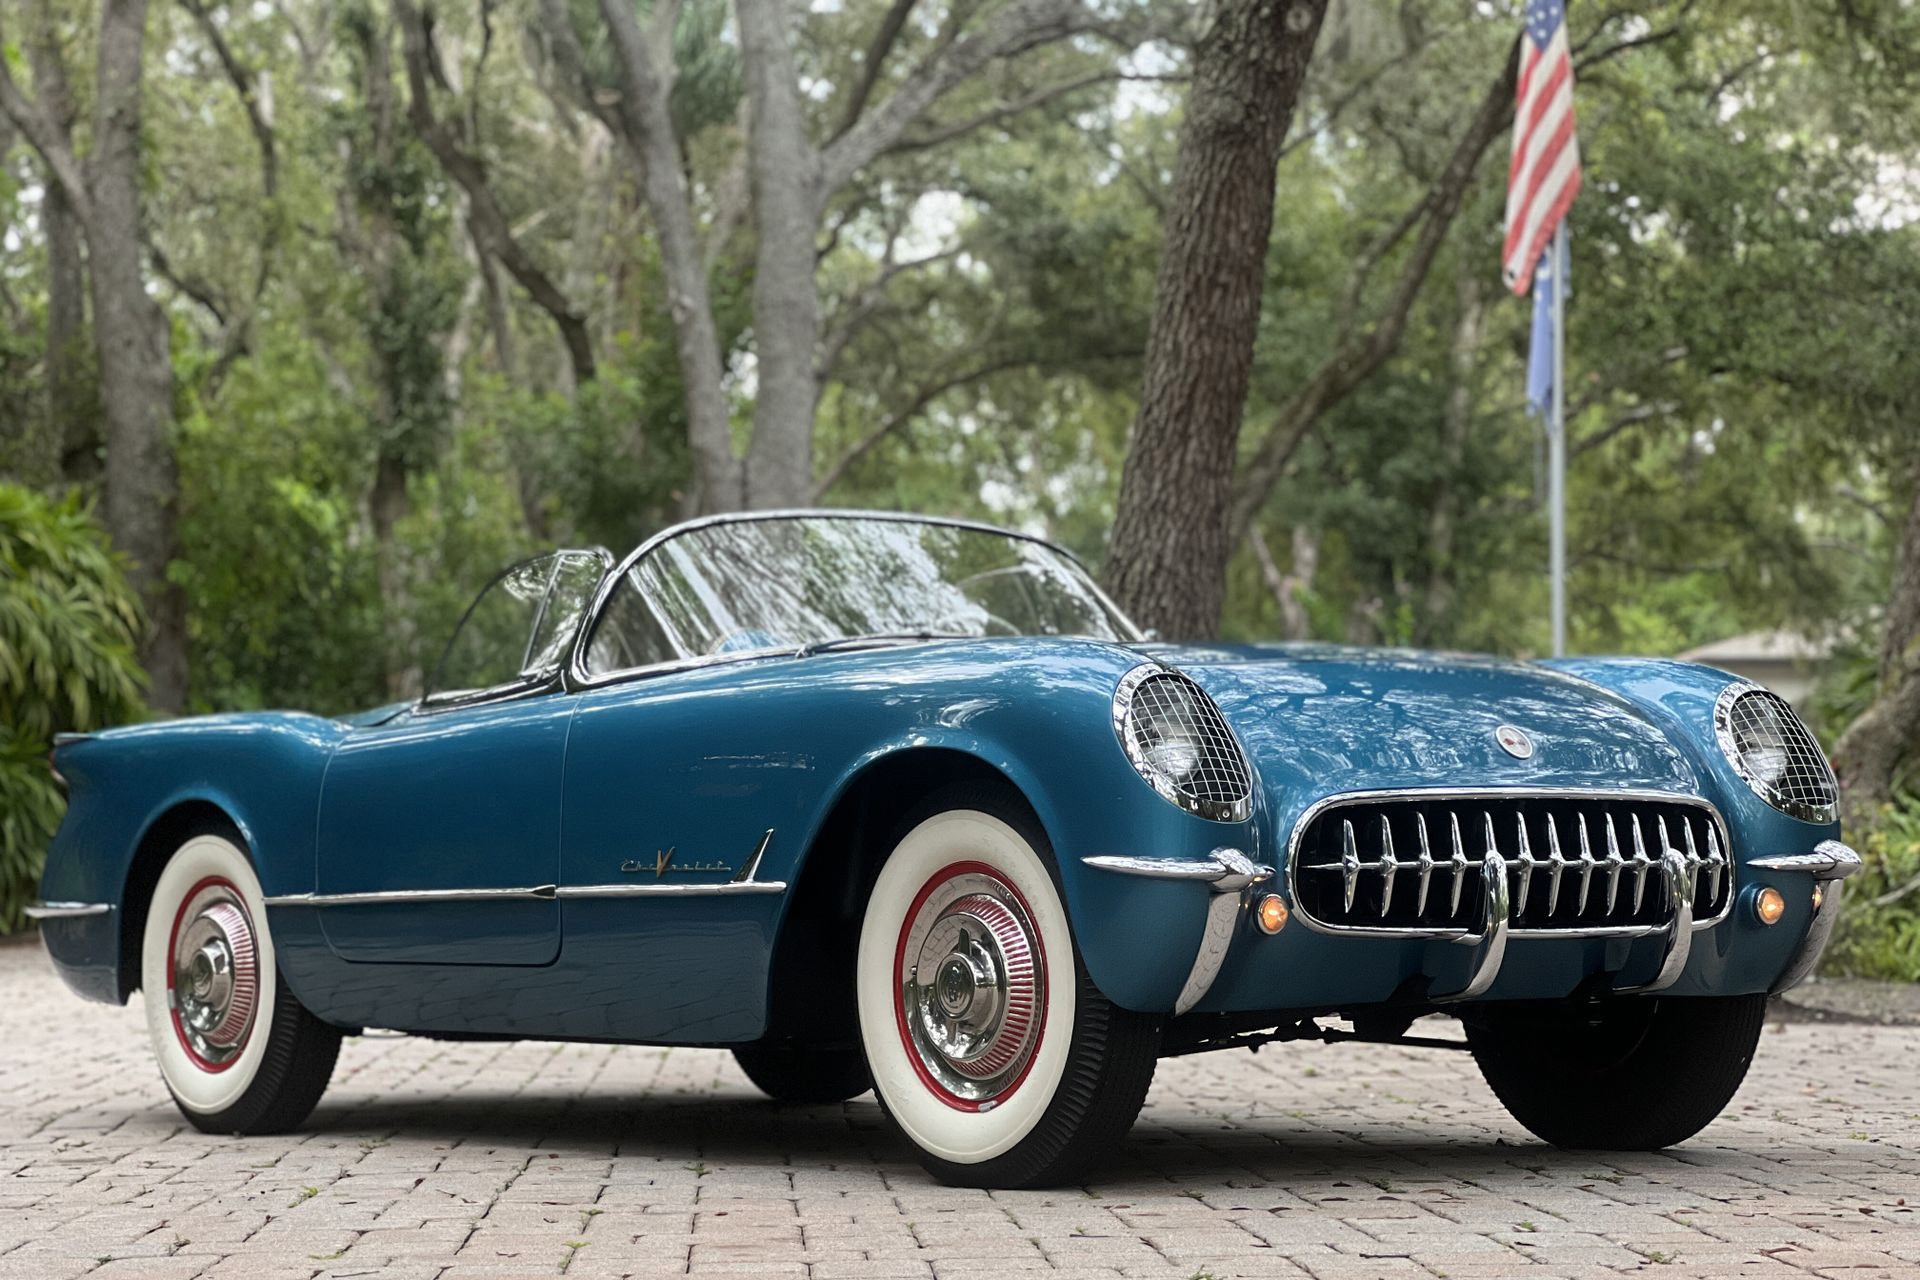 This Rare 1955 Corvette Is from the Year the Legend First Got V8 Power